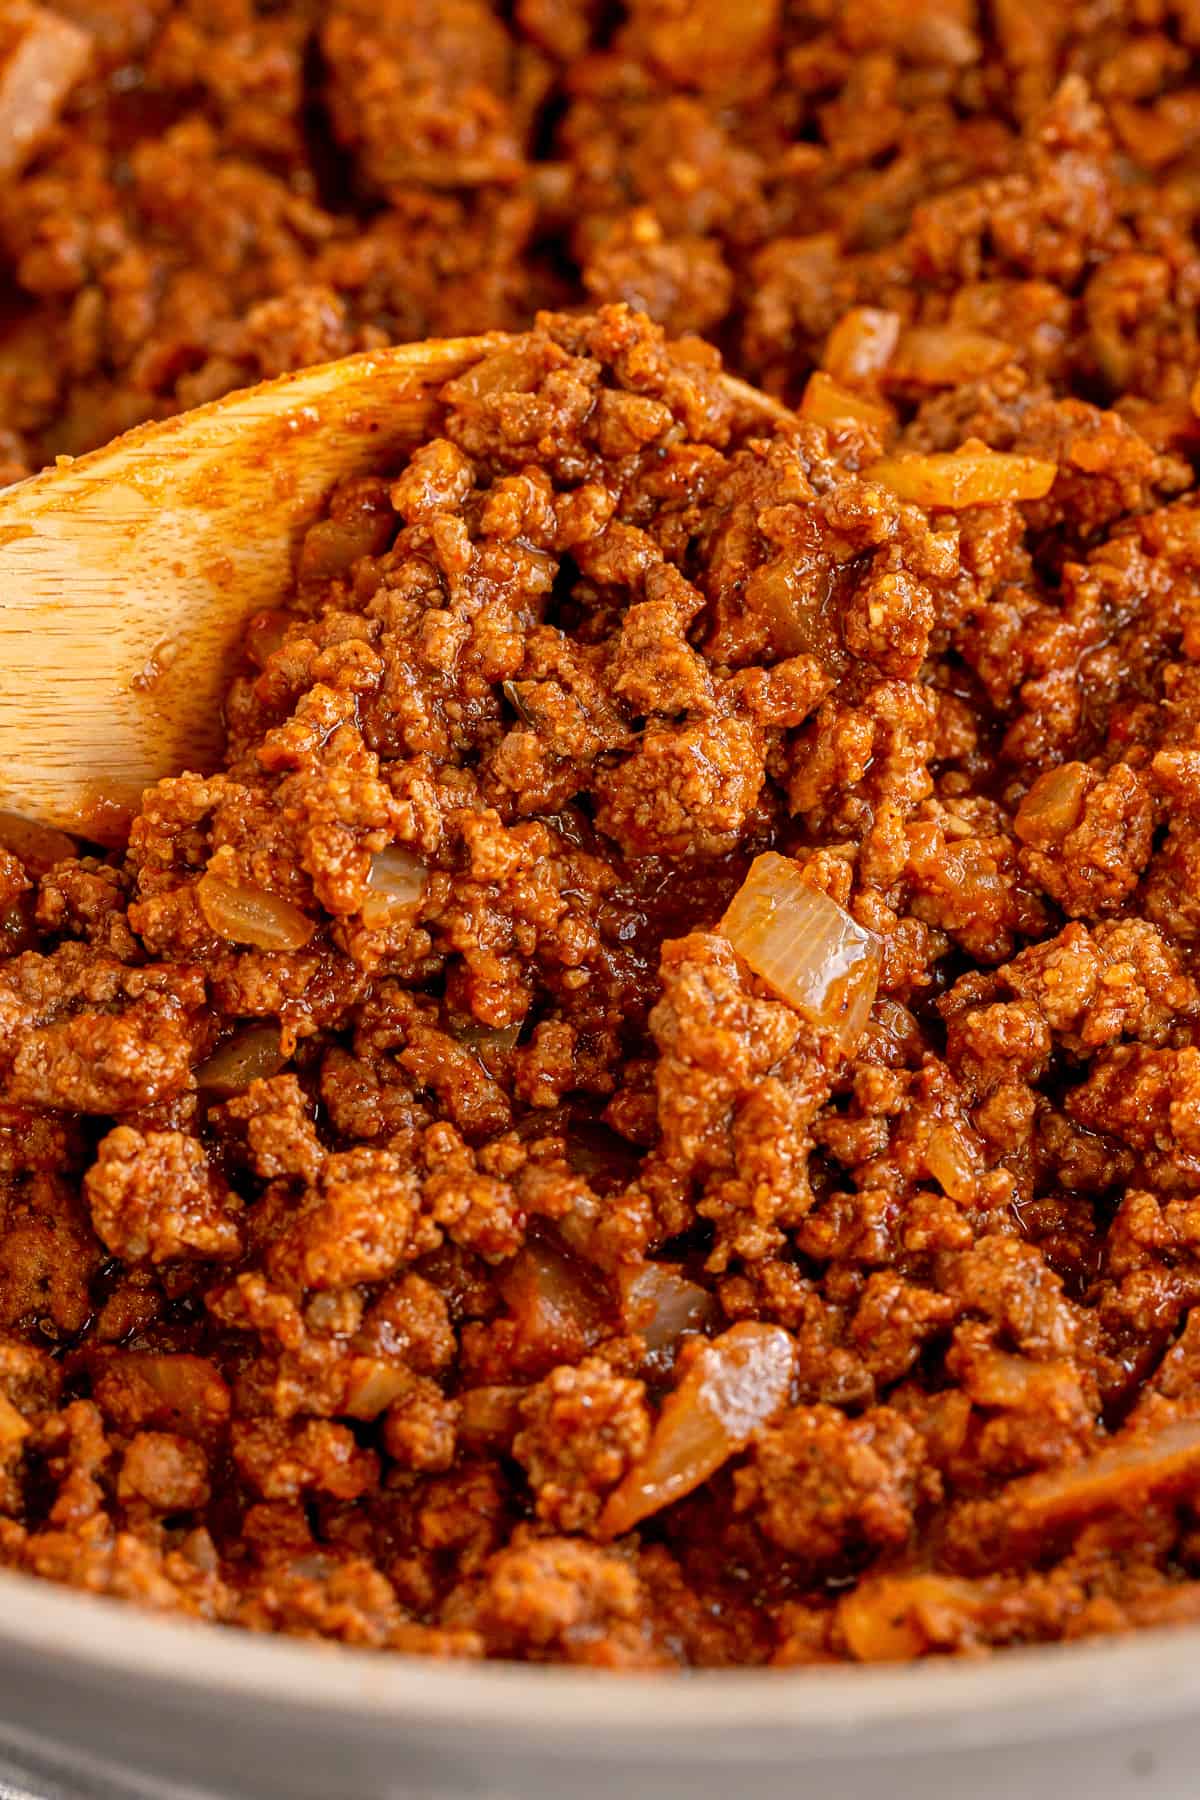 A close up of ground beef taco filling in a skillet.